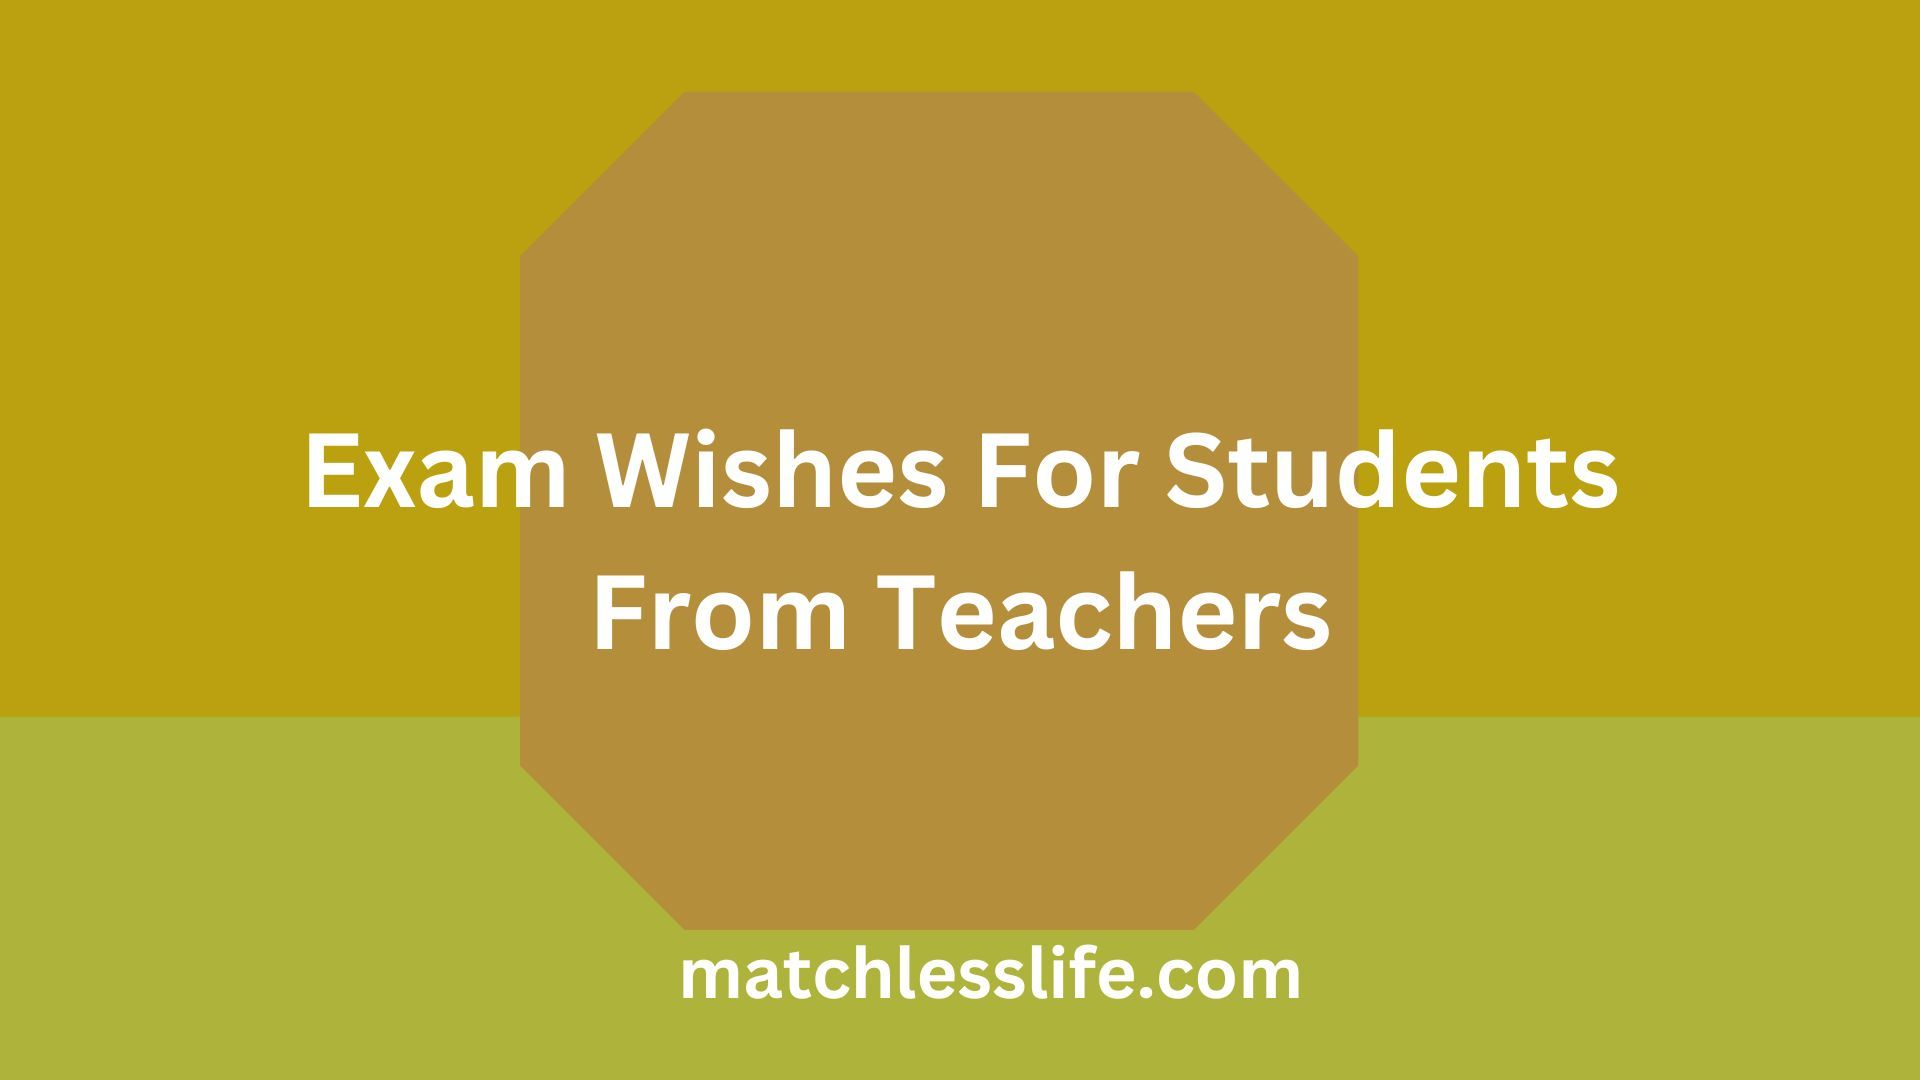 Exam Wishes For Students From Teachers